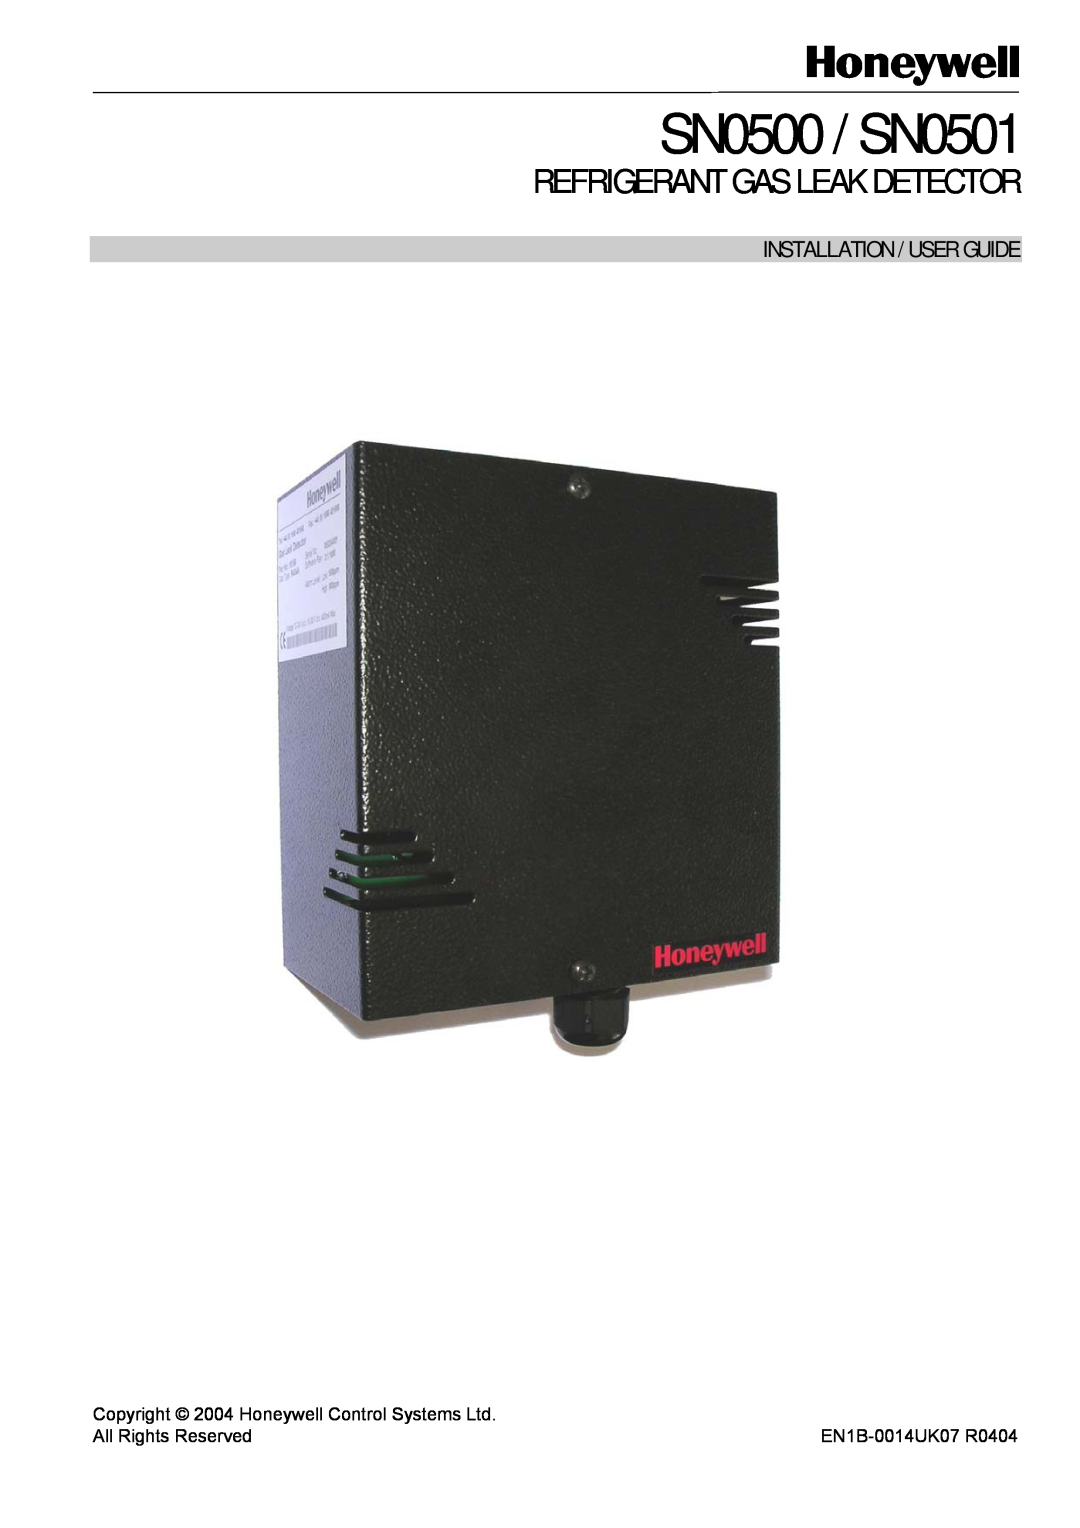 Honeywell manual Installation / User Guide, SN0500 / SN0501, Refrigerant Gas Leak Detector, All Rights Reserved 